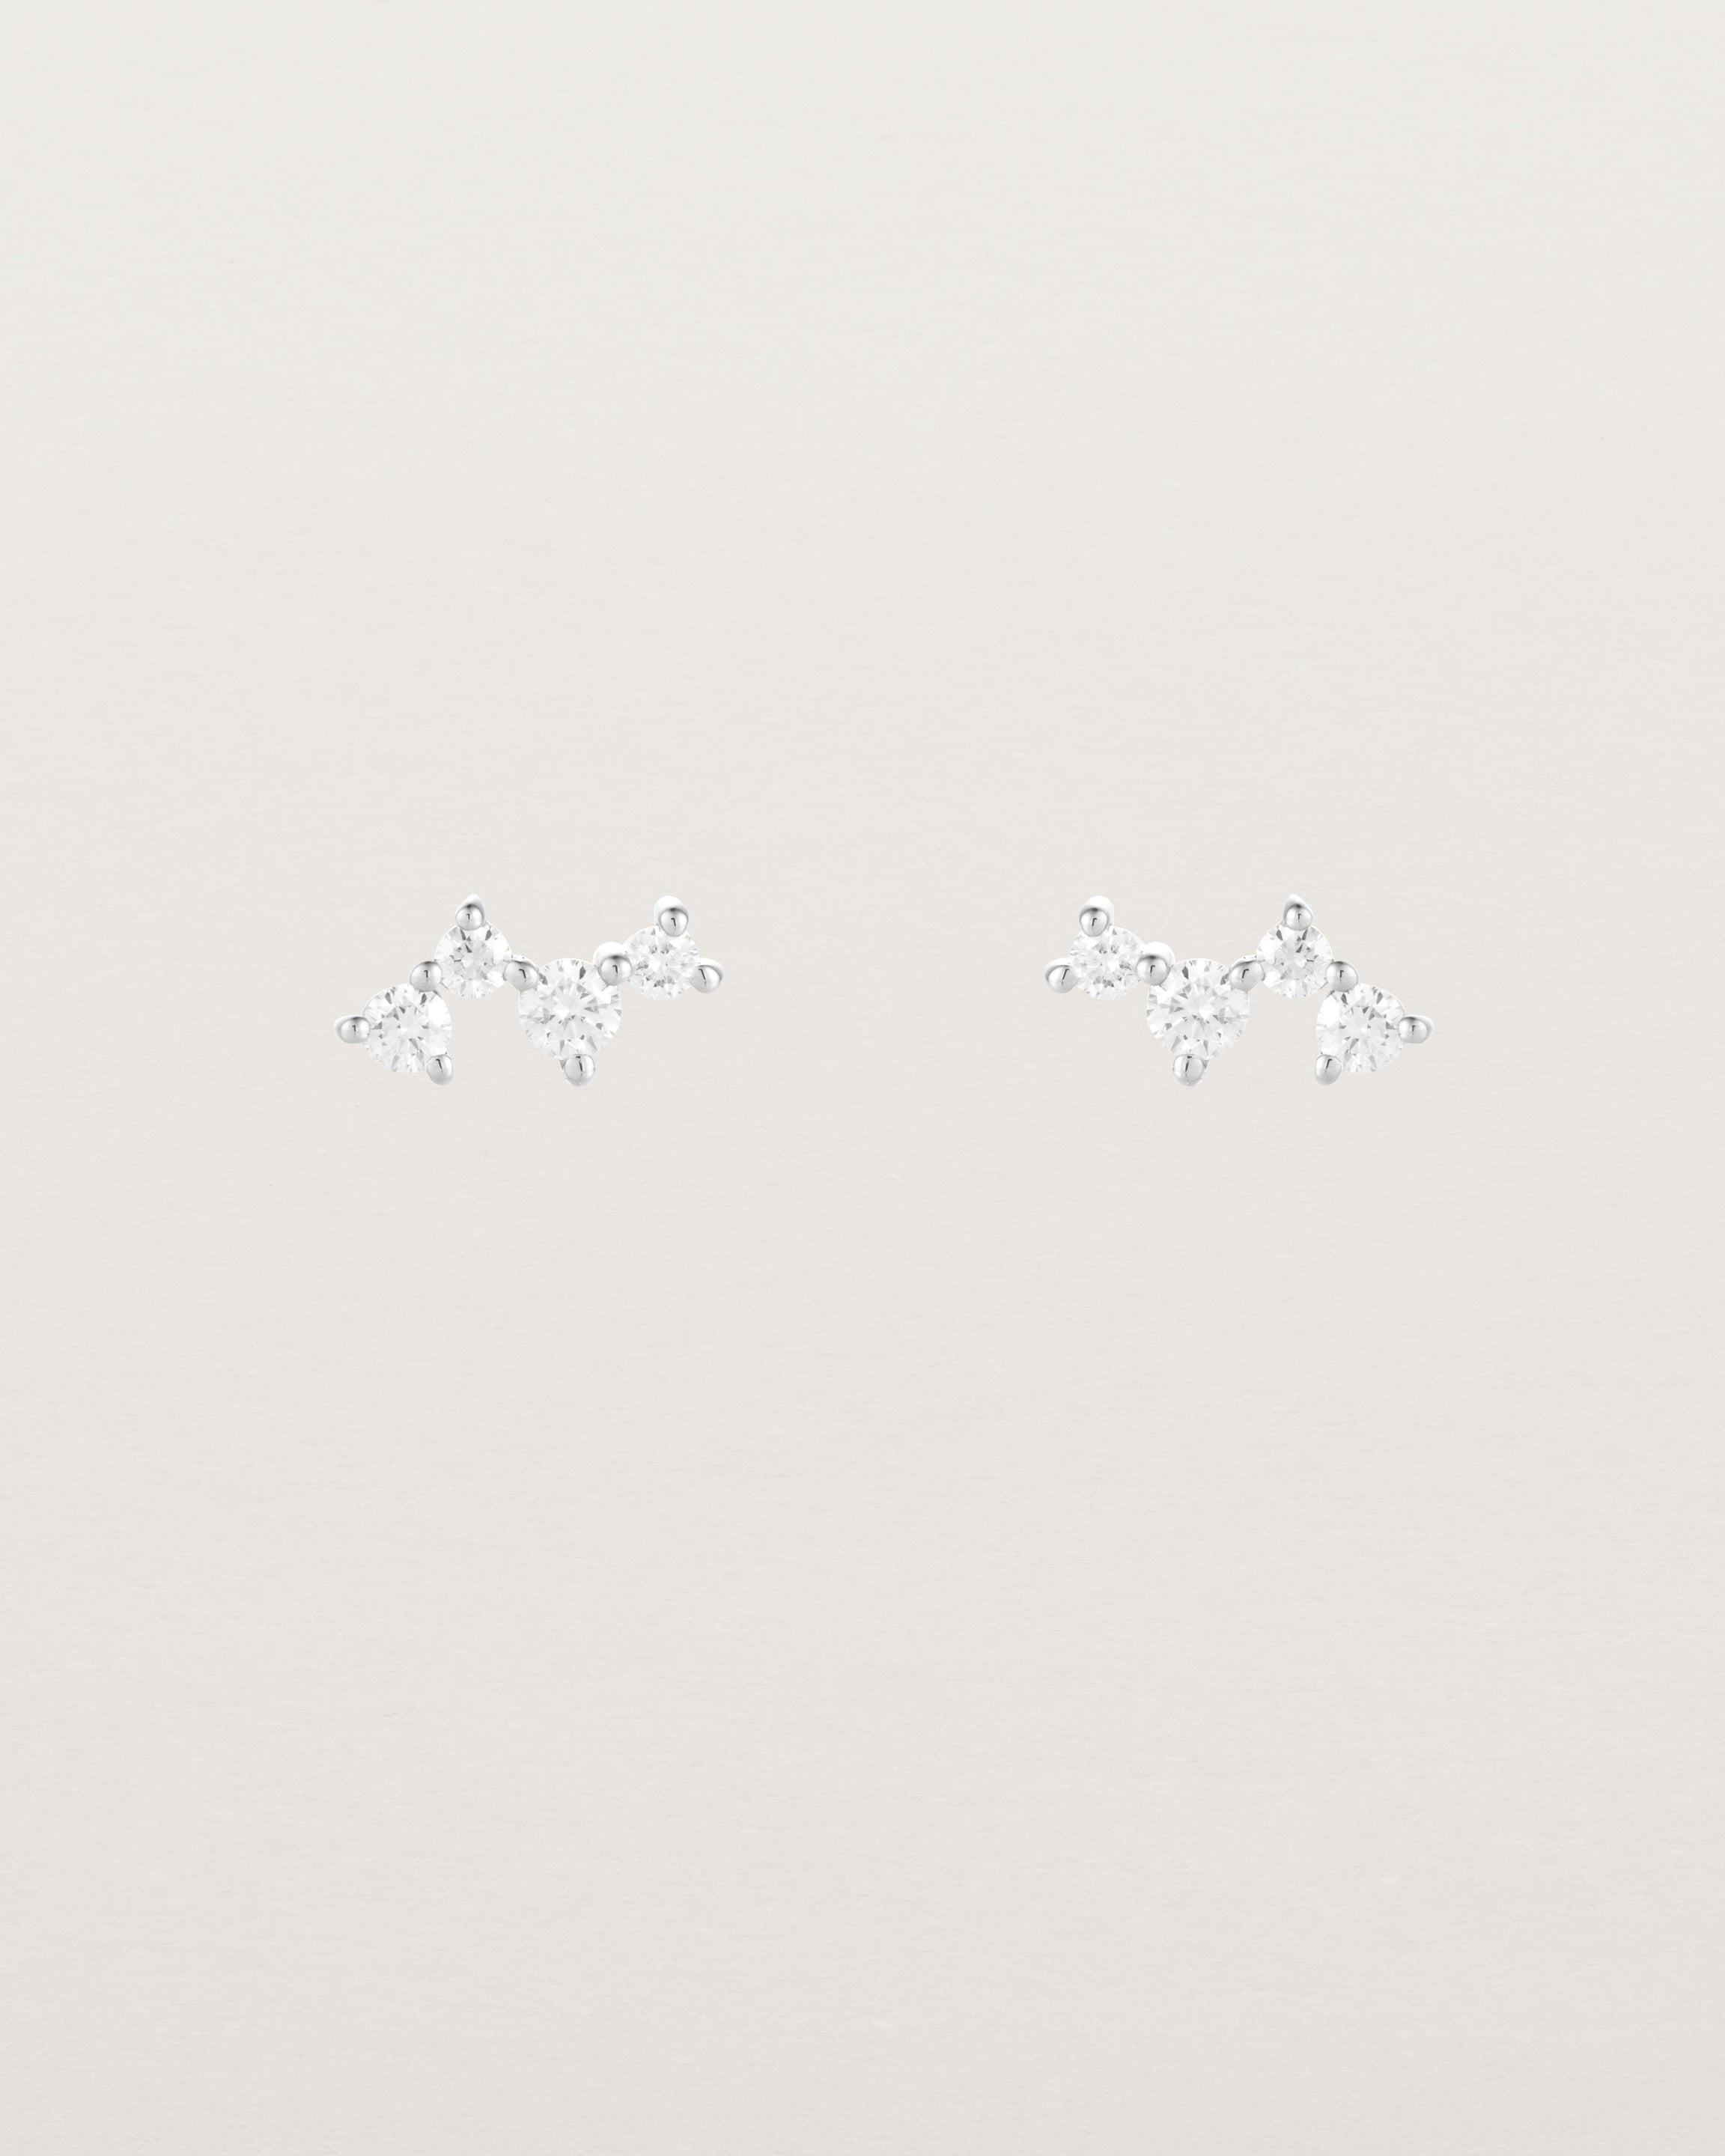 A pair of white gold studs featuring a cluster of four diamonds